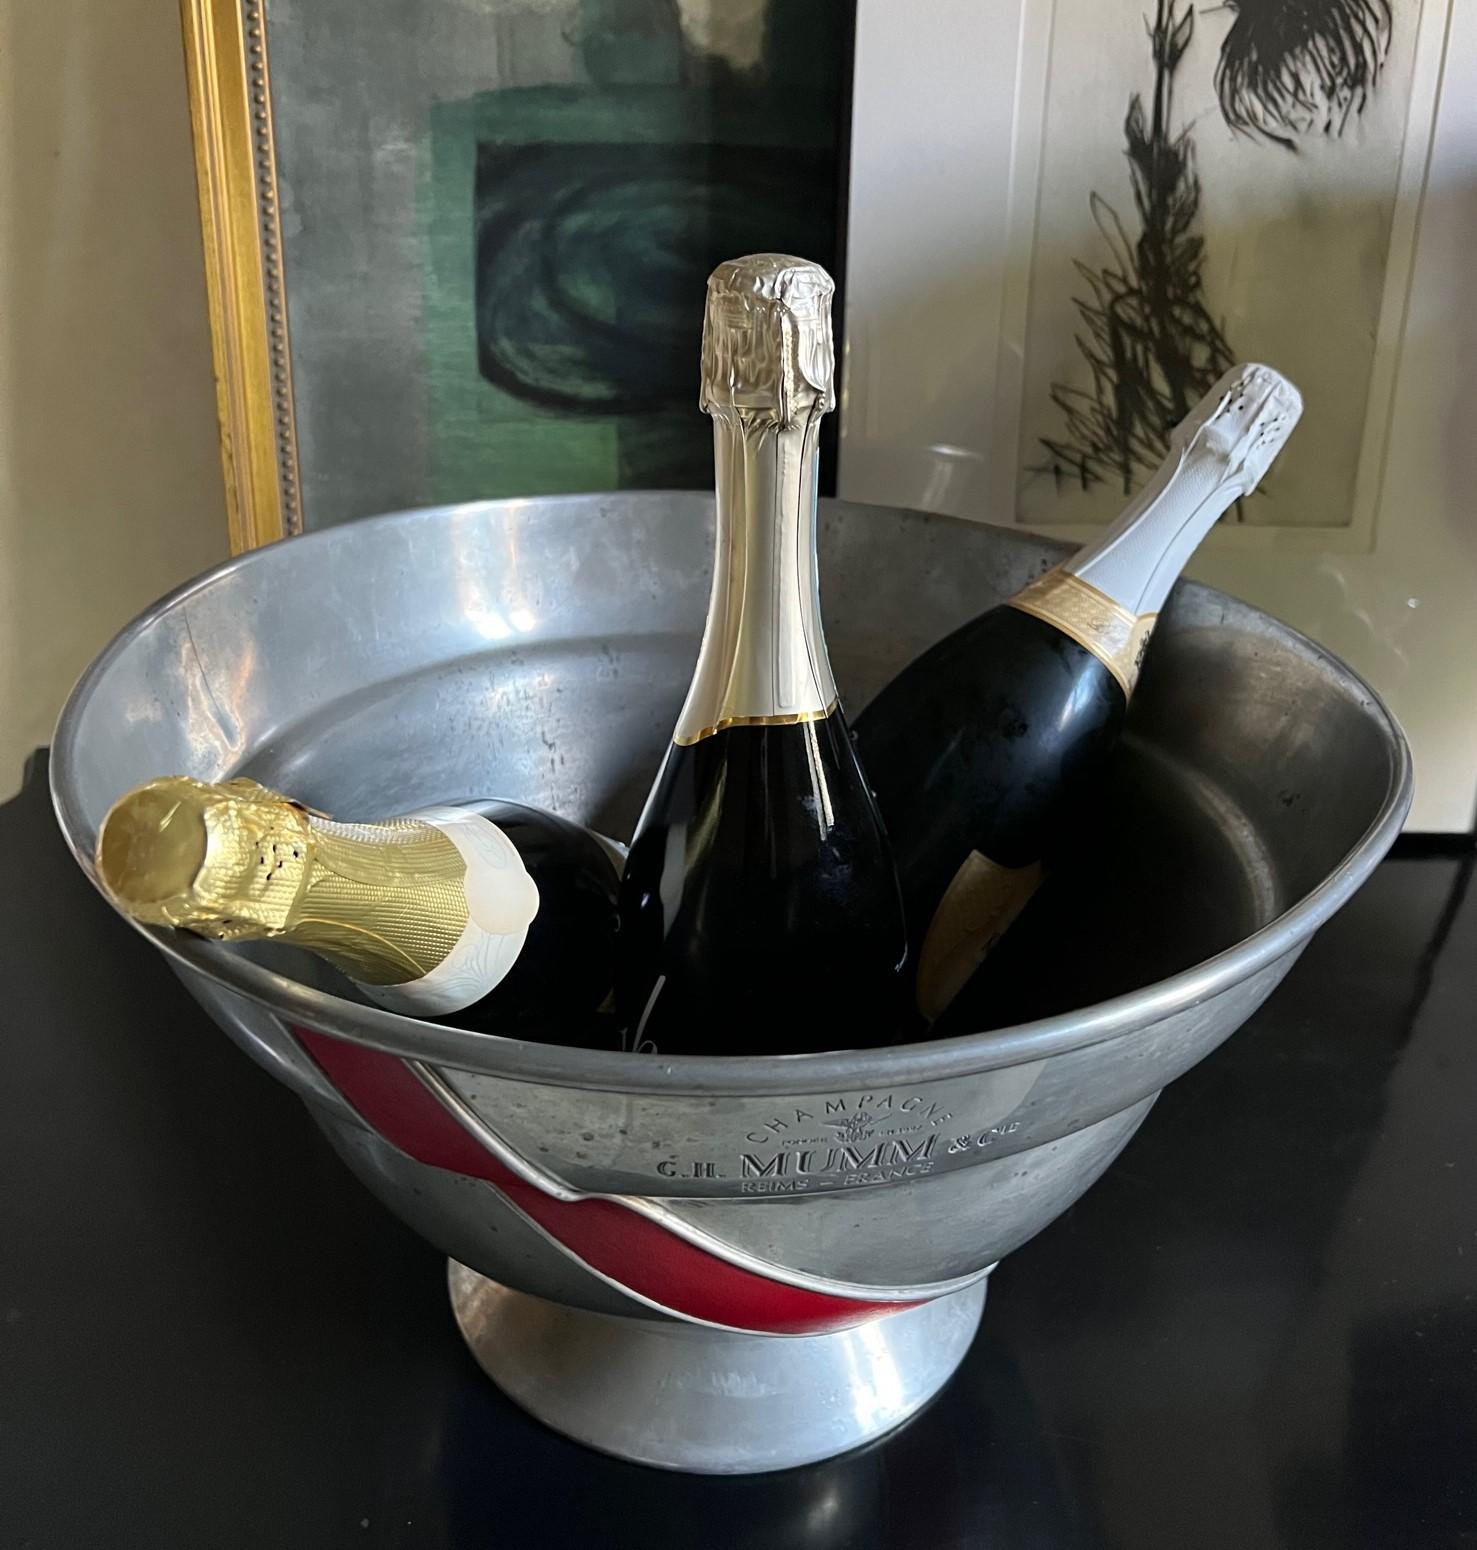 Large vintage pewter champagne bucket made by Etain in France for the Mumm champagne house. Includes a red leather diagonal stripe.

Impressed on the front: Champagne Fondee En 1827 G.H. Mumm & Cie Reims-France, with the eagle emblem.

Famous